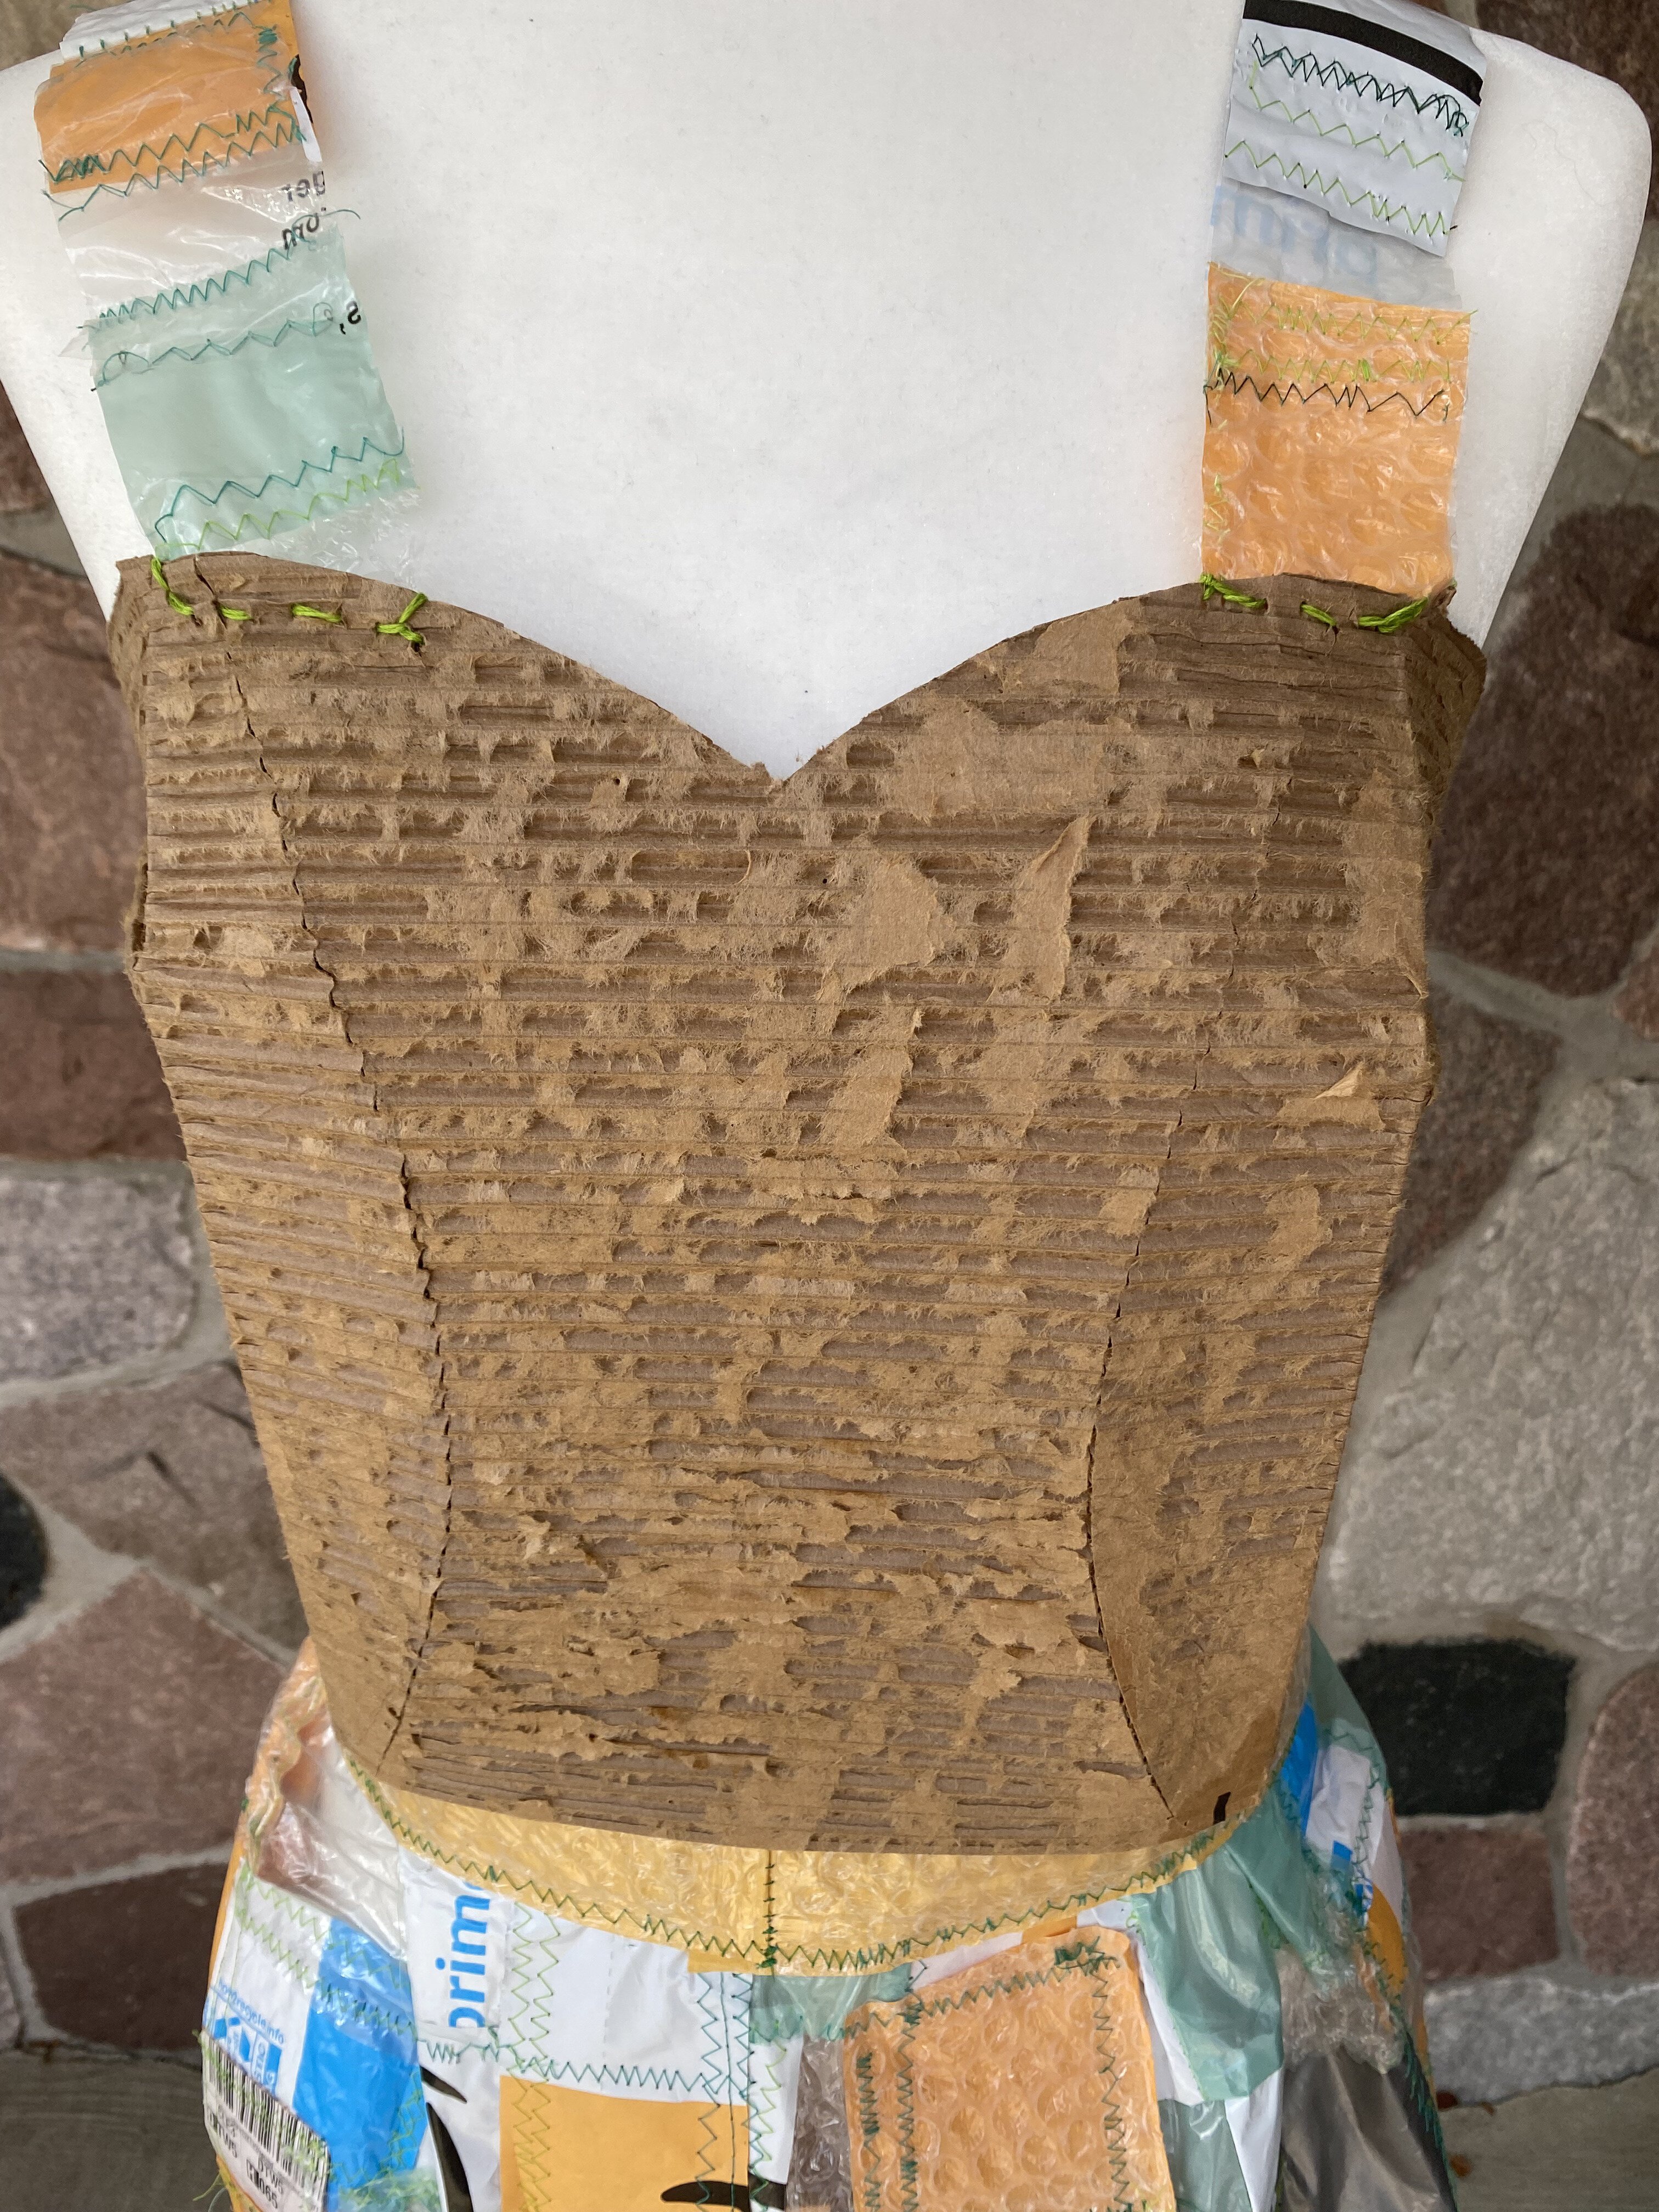 A close-up view of the front of the dress. The straps were made with more strips of patchwork plastic.